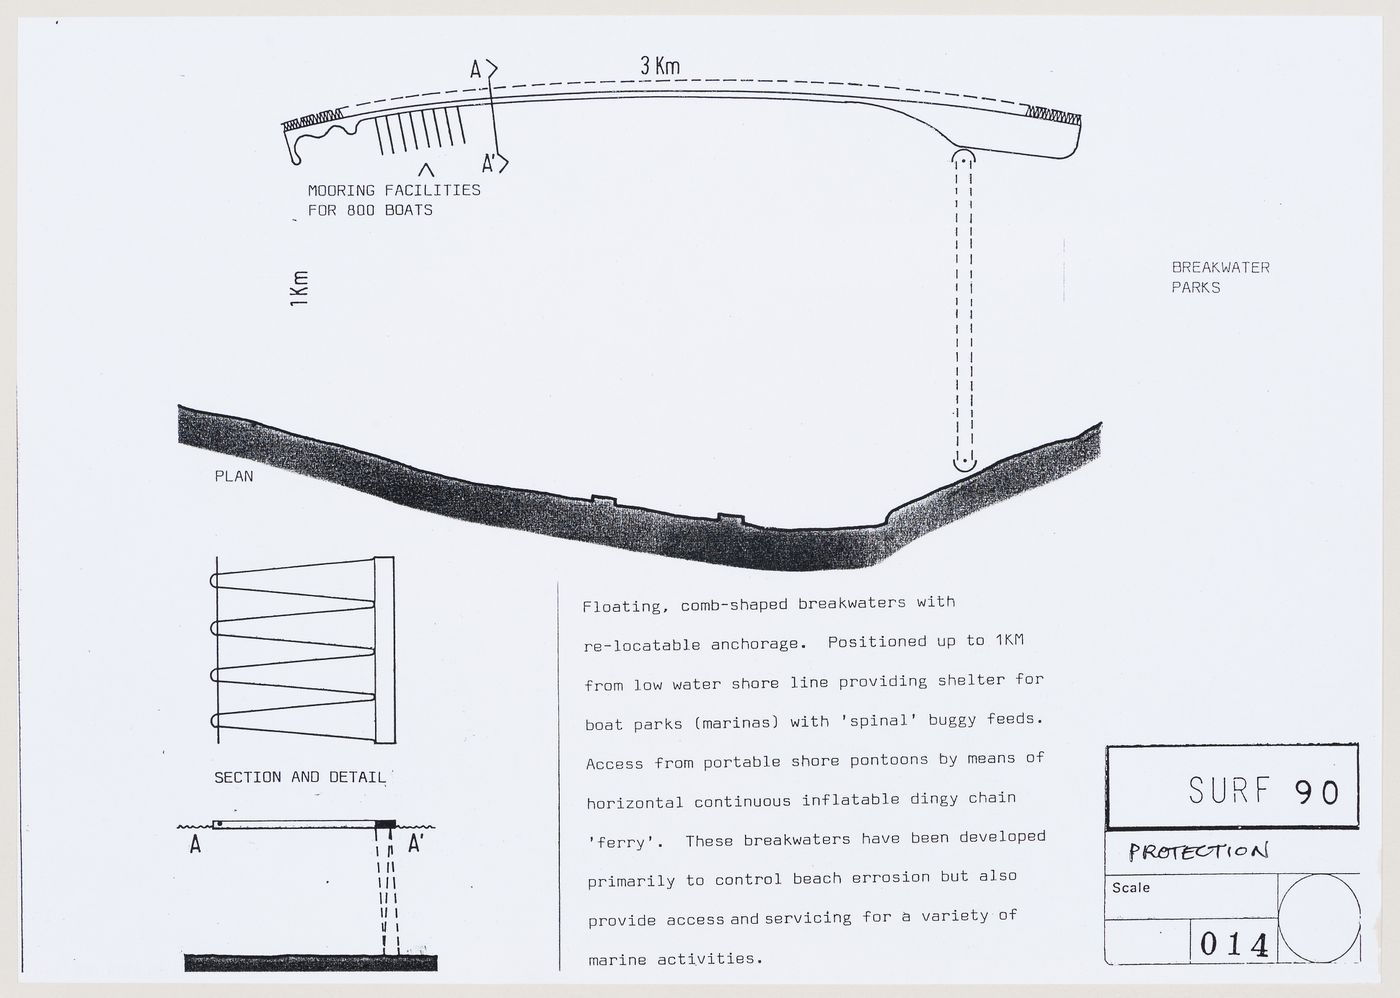 SURF 90: presentation drawing for floating, comb-shaped breakwaters